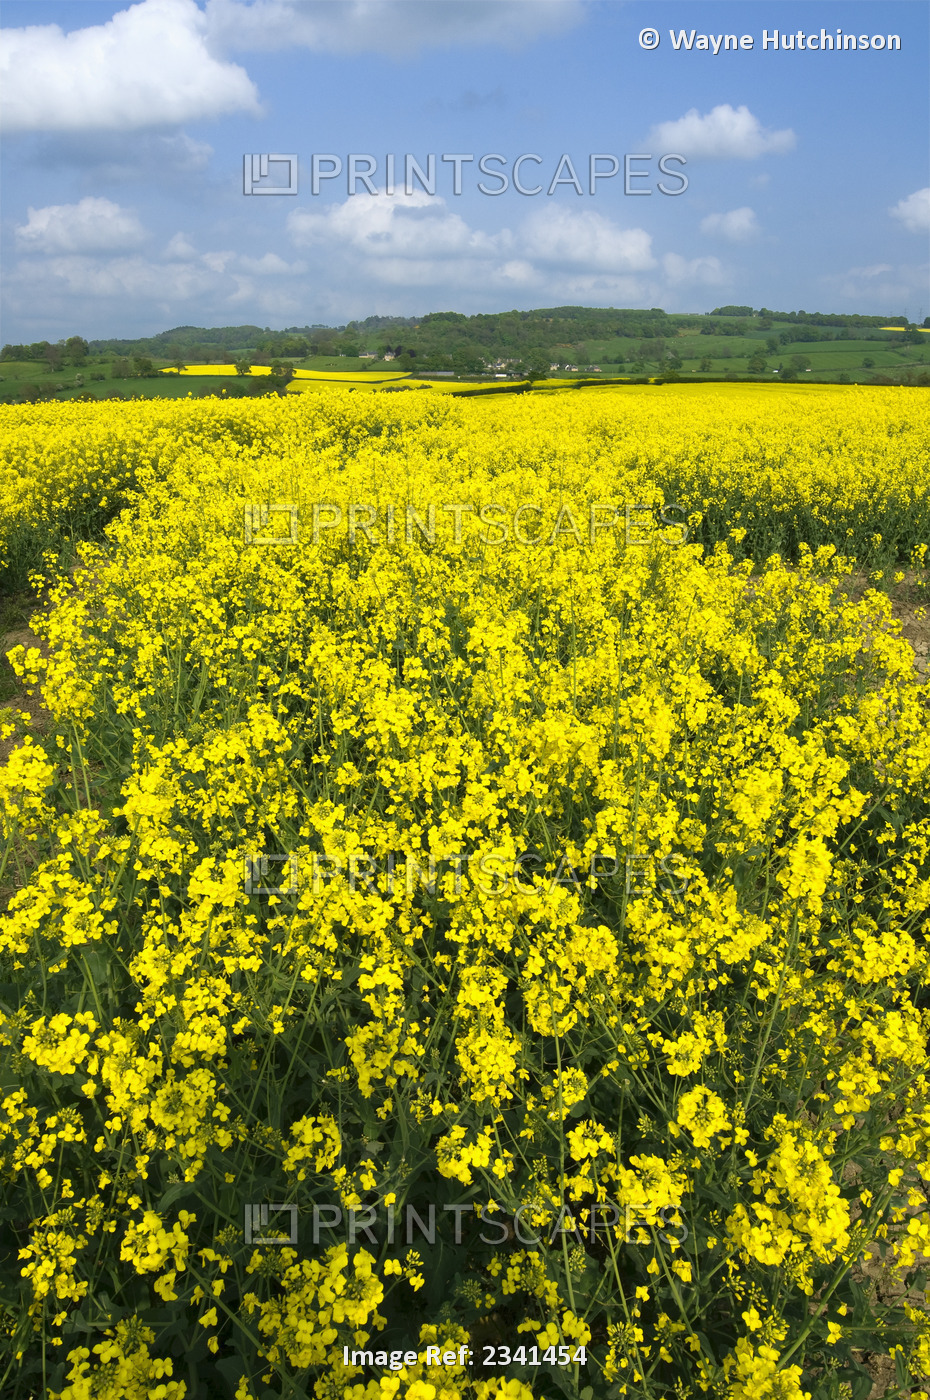 Agriculture - Sloping field of canola (rape seed) in full bloom. Canola seed is ...